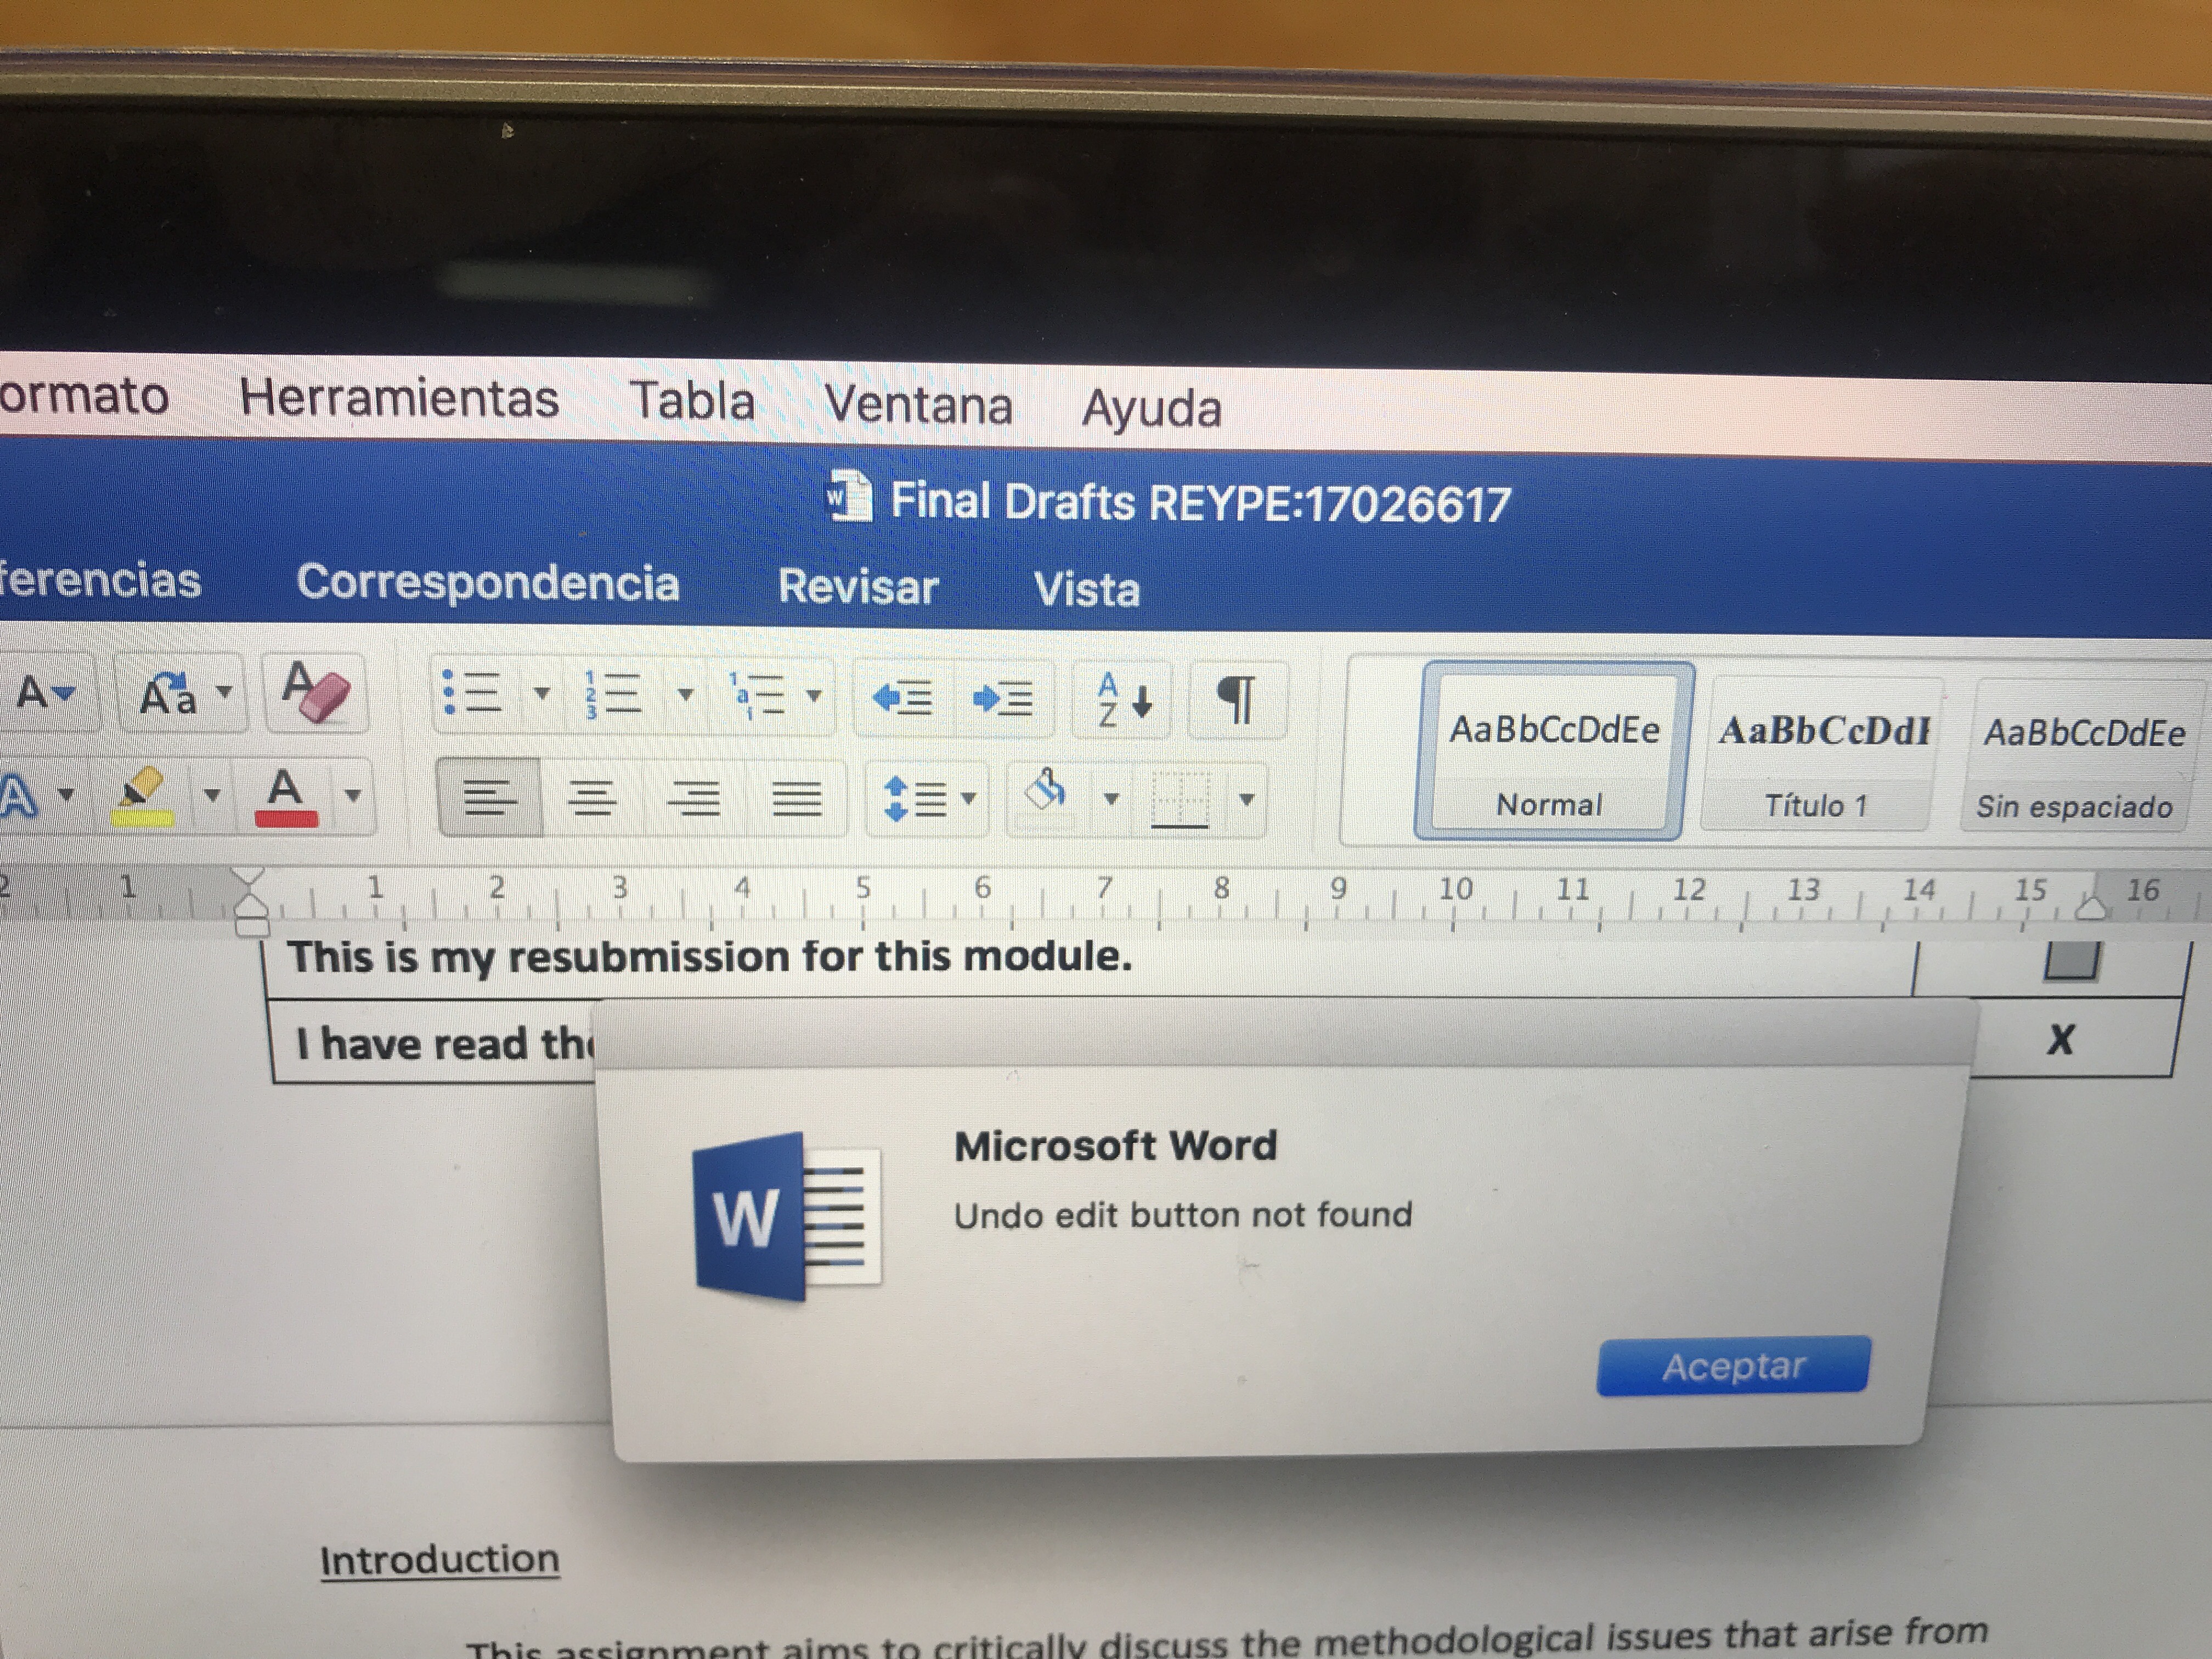 hyperlinks not working ms word for mac